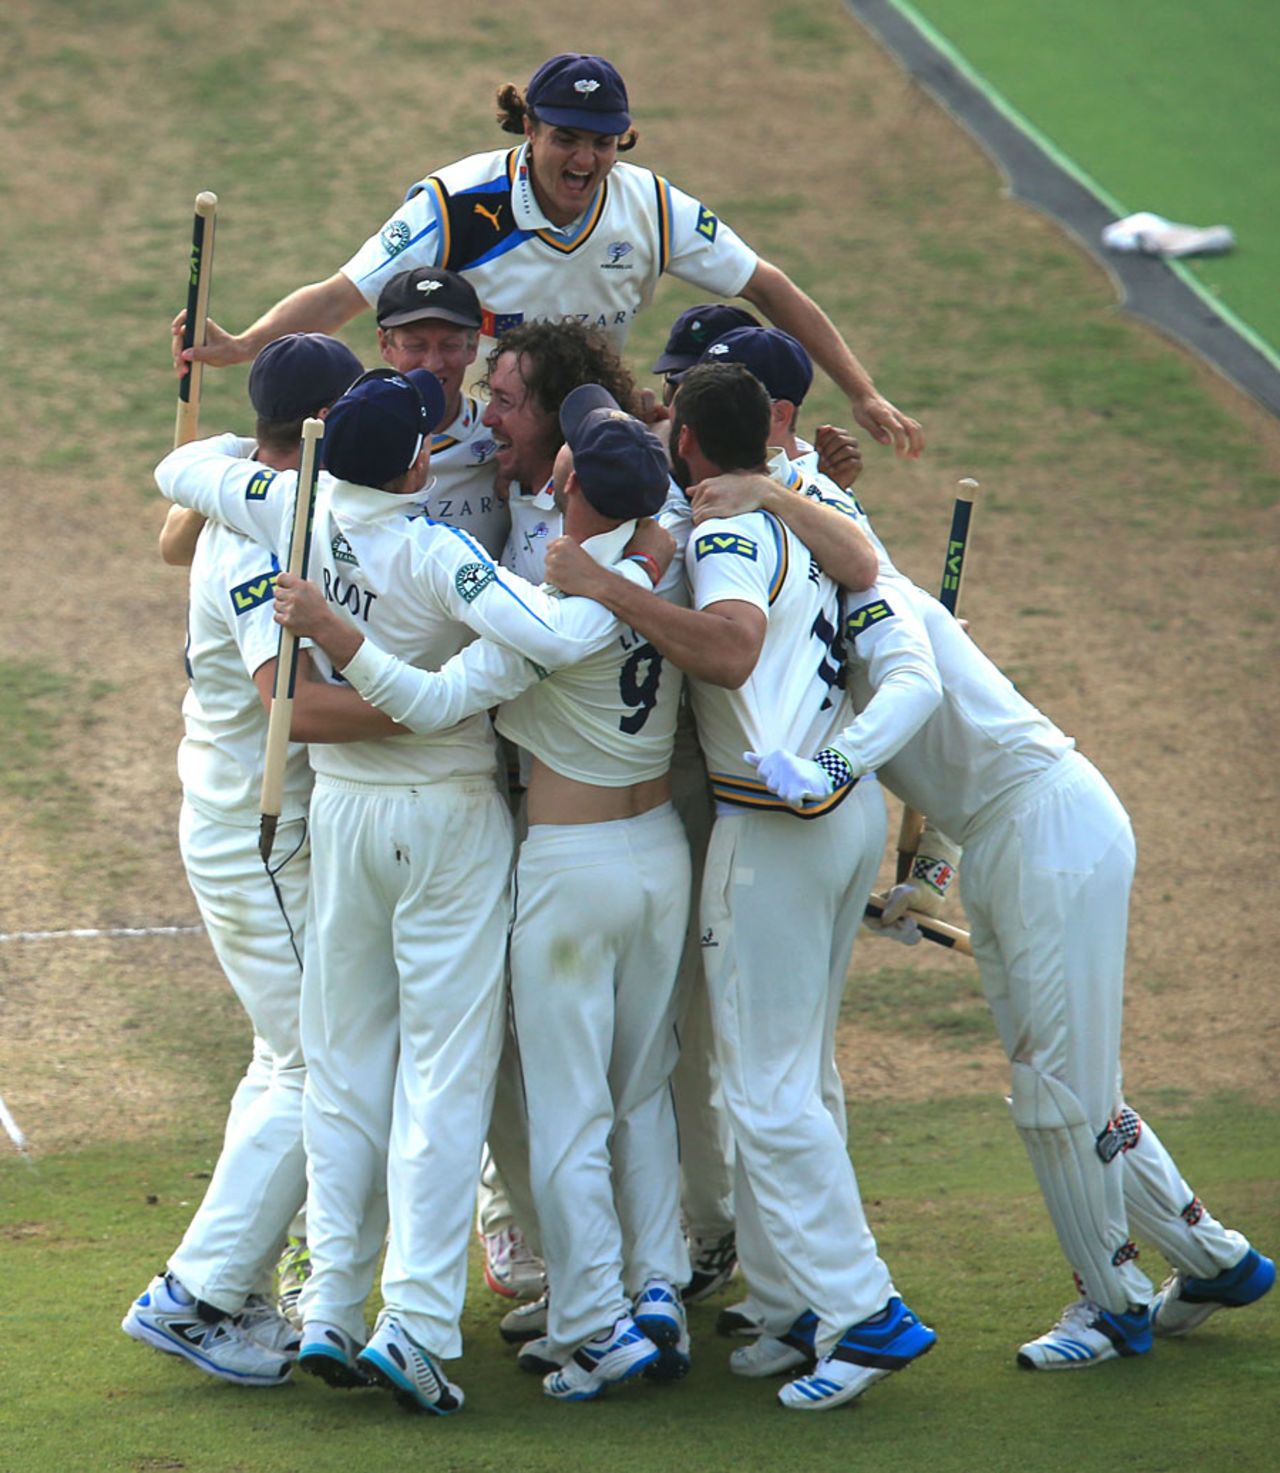 Yorkshire get into their victory huddle, Nottinghamshire v Yorkshire, County Championship, Division One, Trent Bridge, September 12, 2014